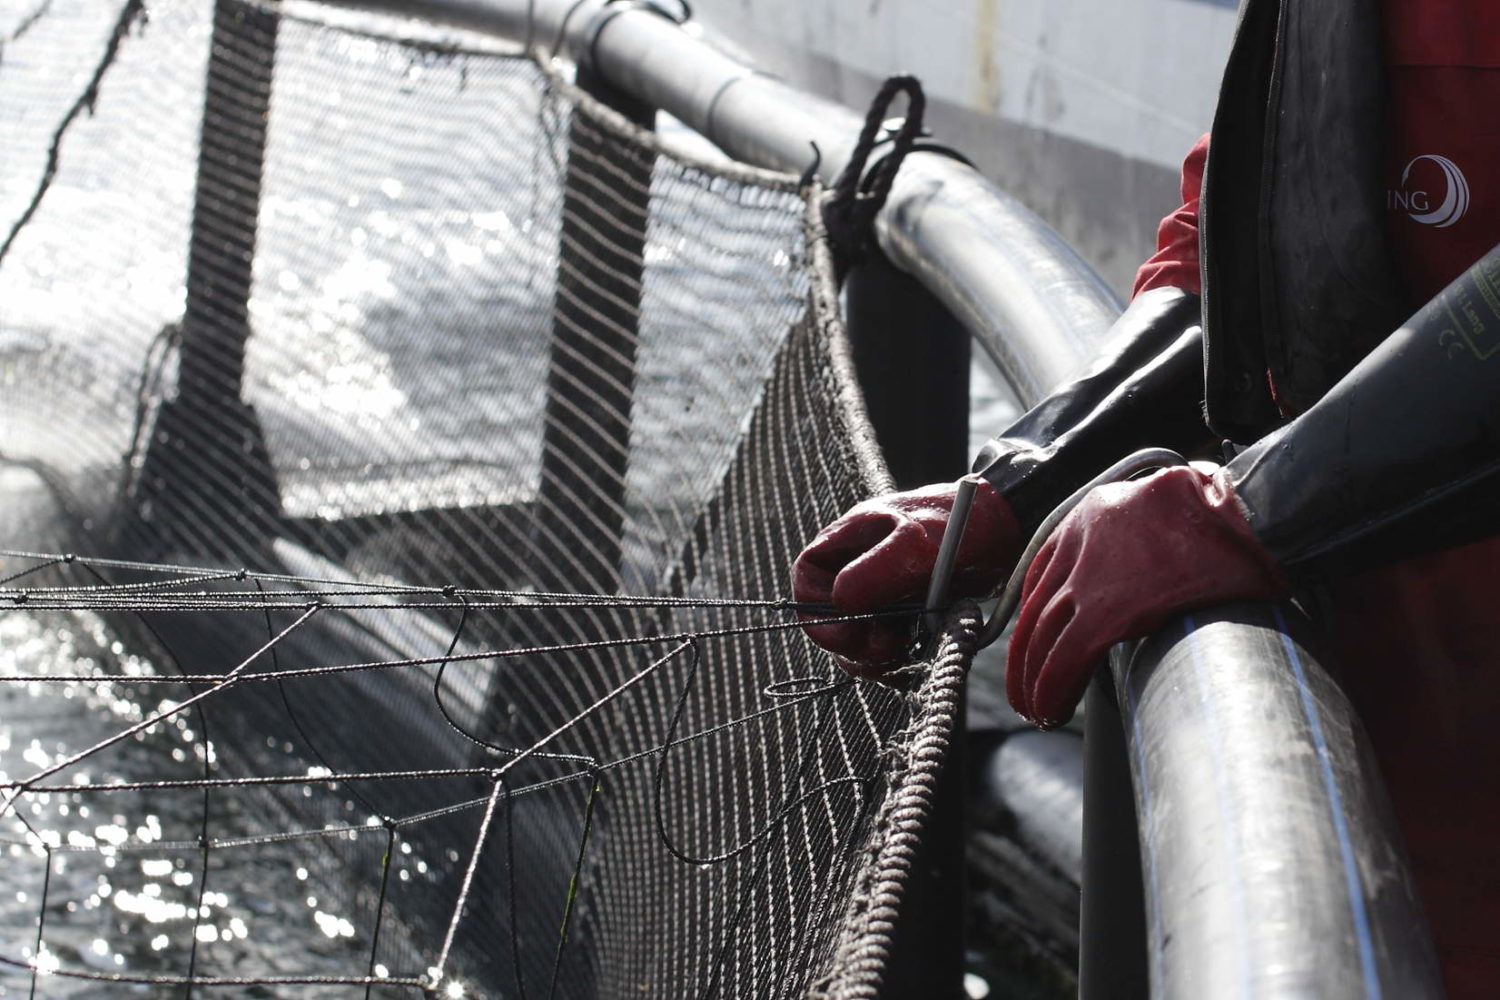 close up photo shows gloved hands holding the net of a salmon farm